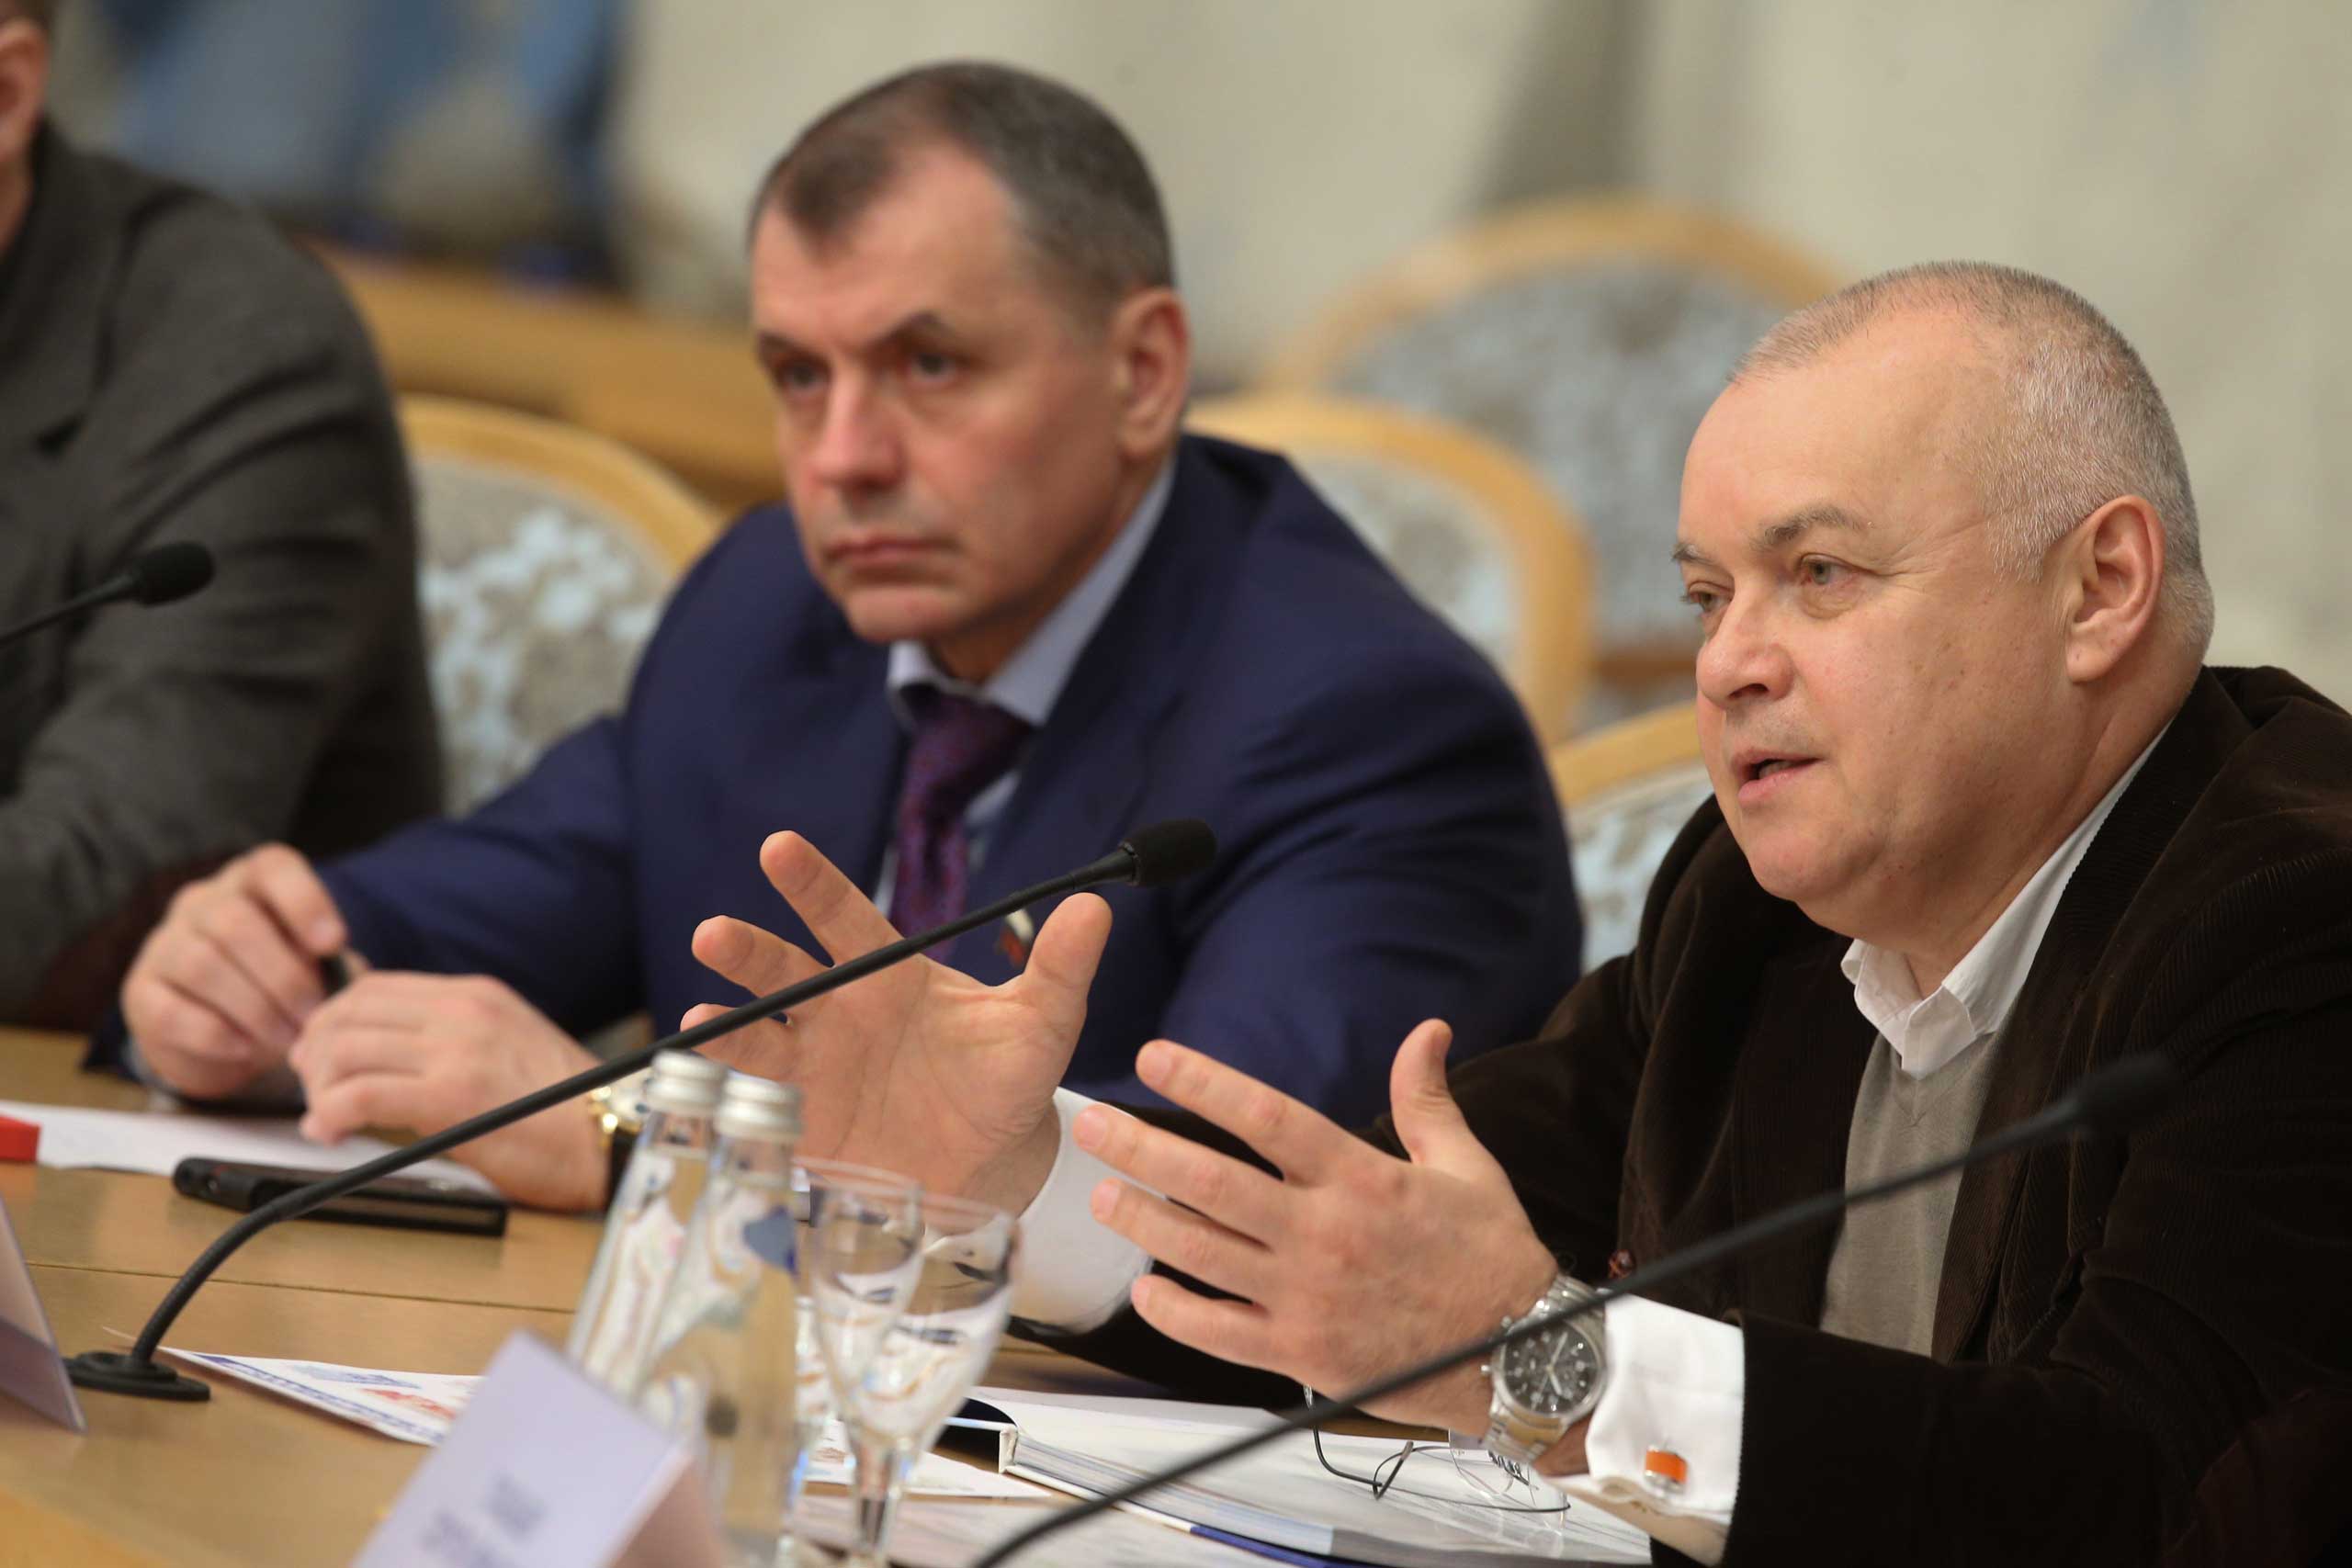 Dmitri Kiselyov, who runs the Kremlin’s media conglomerate, Rossiya Segodnya, attends a round table discussion dedicated to the first anniversary of the reunification of Crimea with the Russian Federation at Moscow's President Hotel, March 19, 2015. (Vyacheslav Prokofyev—Itar-Tass/Corbis)